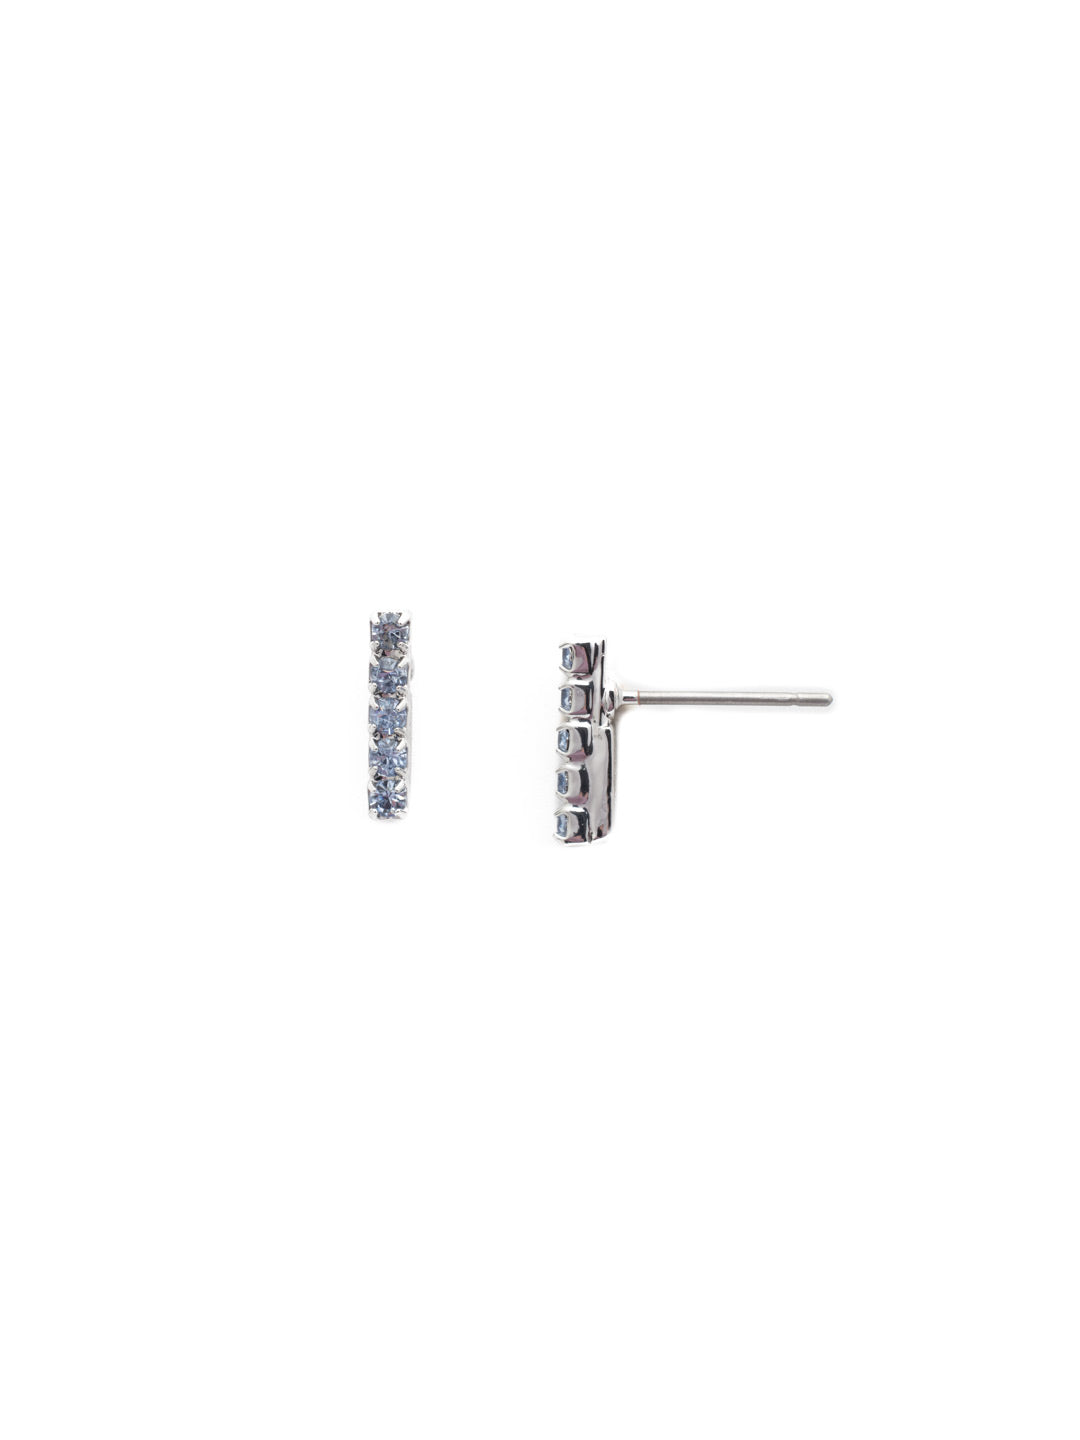 Raina Stud Earring - EDD1PDWNB - Stacked just right! Five round crystals form a petite line in this modern post earring. From Sorrelli's Windsor Blue collection in our Palladium finish.